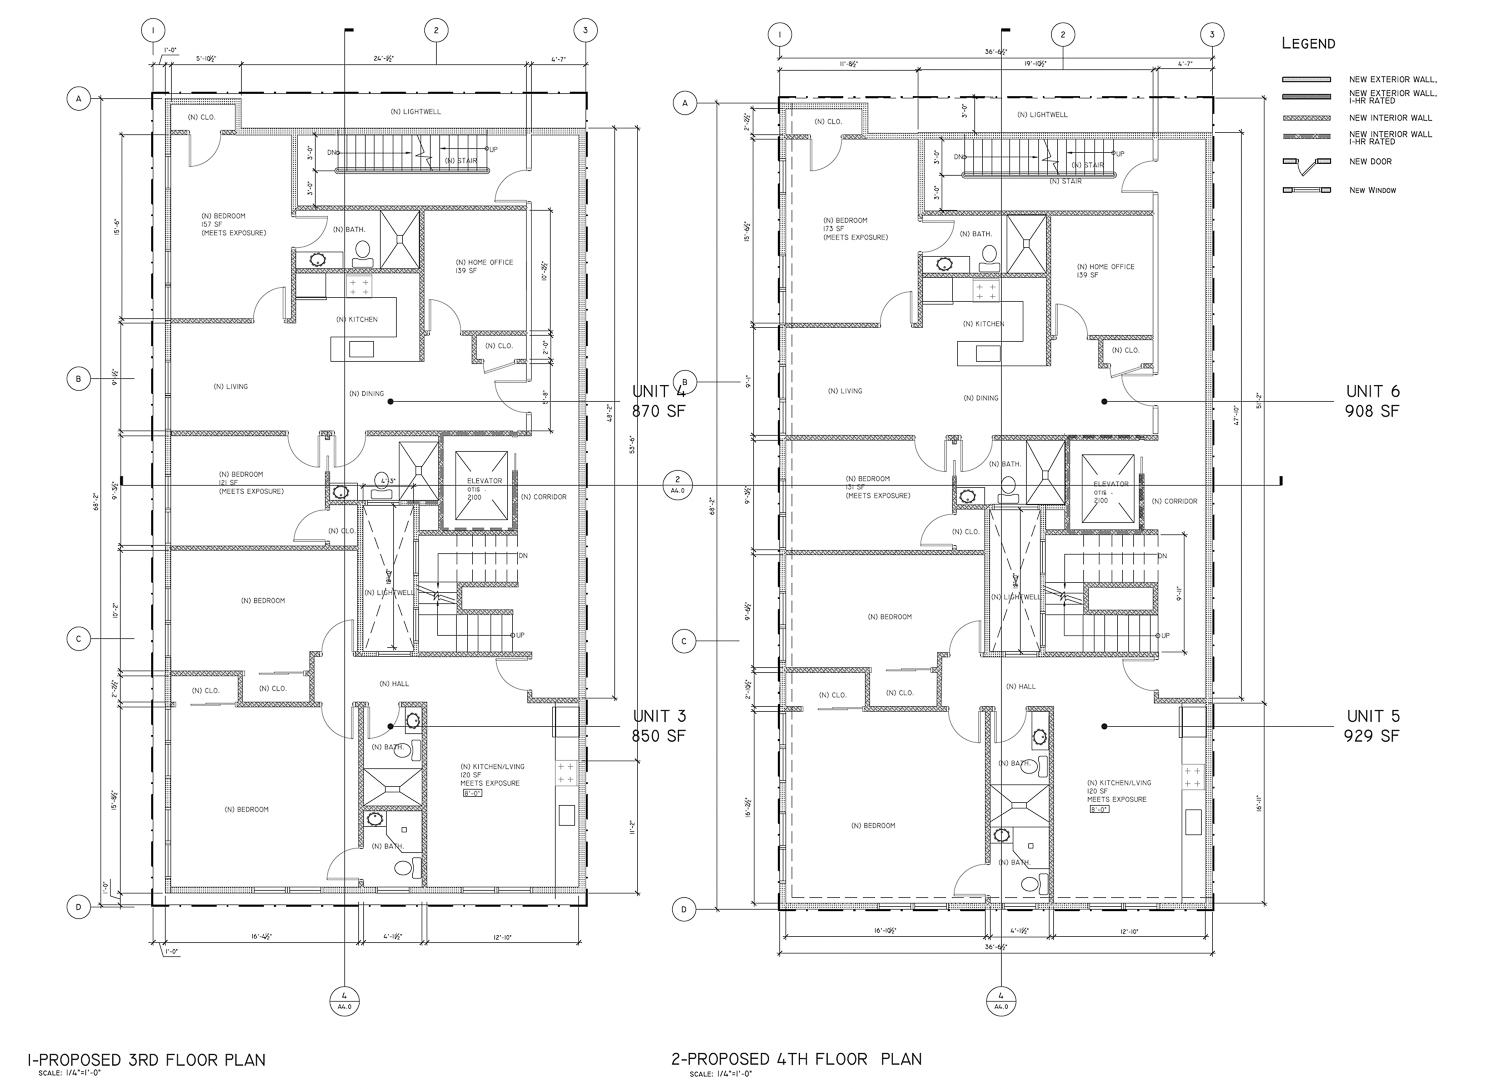 749 Grant Avenue apartment floor plans, drawing by Xie Associates